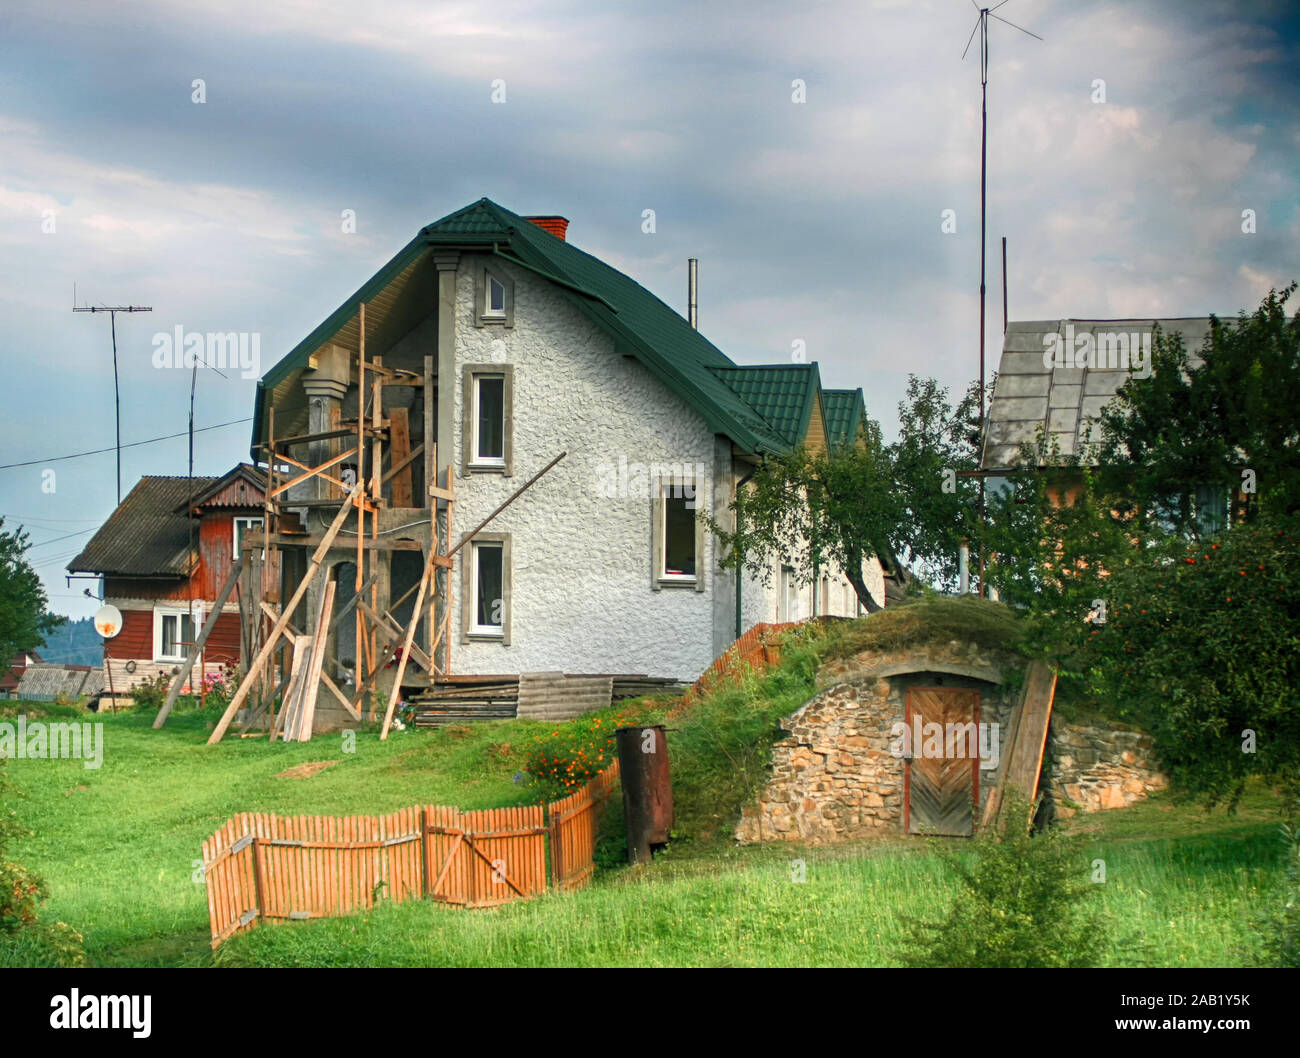 The Construction Of A Beautiful House In The Forest Stock Photo Alamy